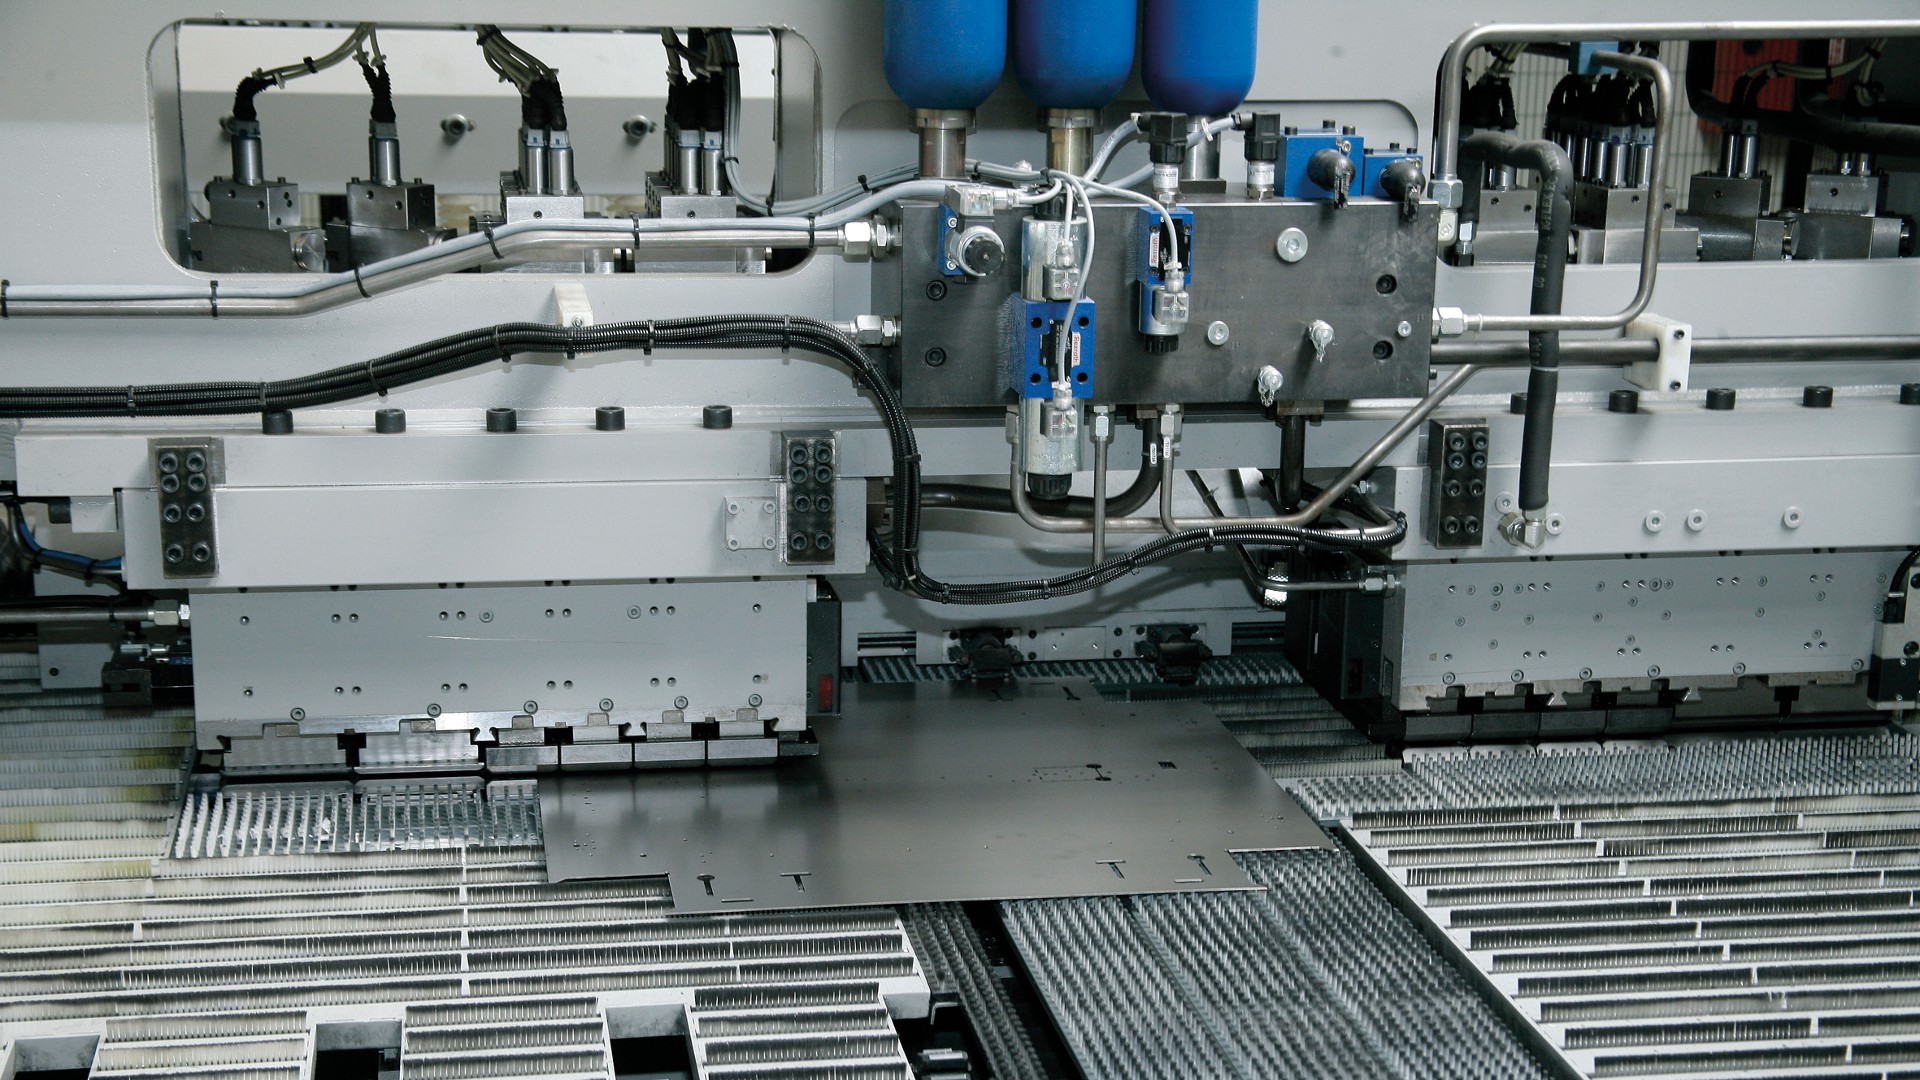 The sheet metal industry is a mature and competitive business. Ensuring efficiency and making use of every resource is important to stay competitive. This article highlights automation options in sheet metal processing.